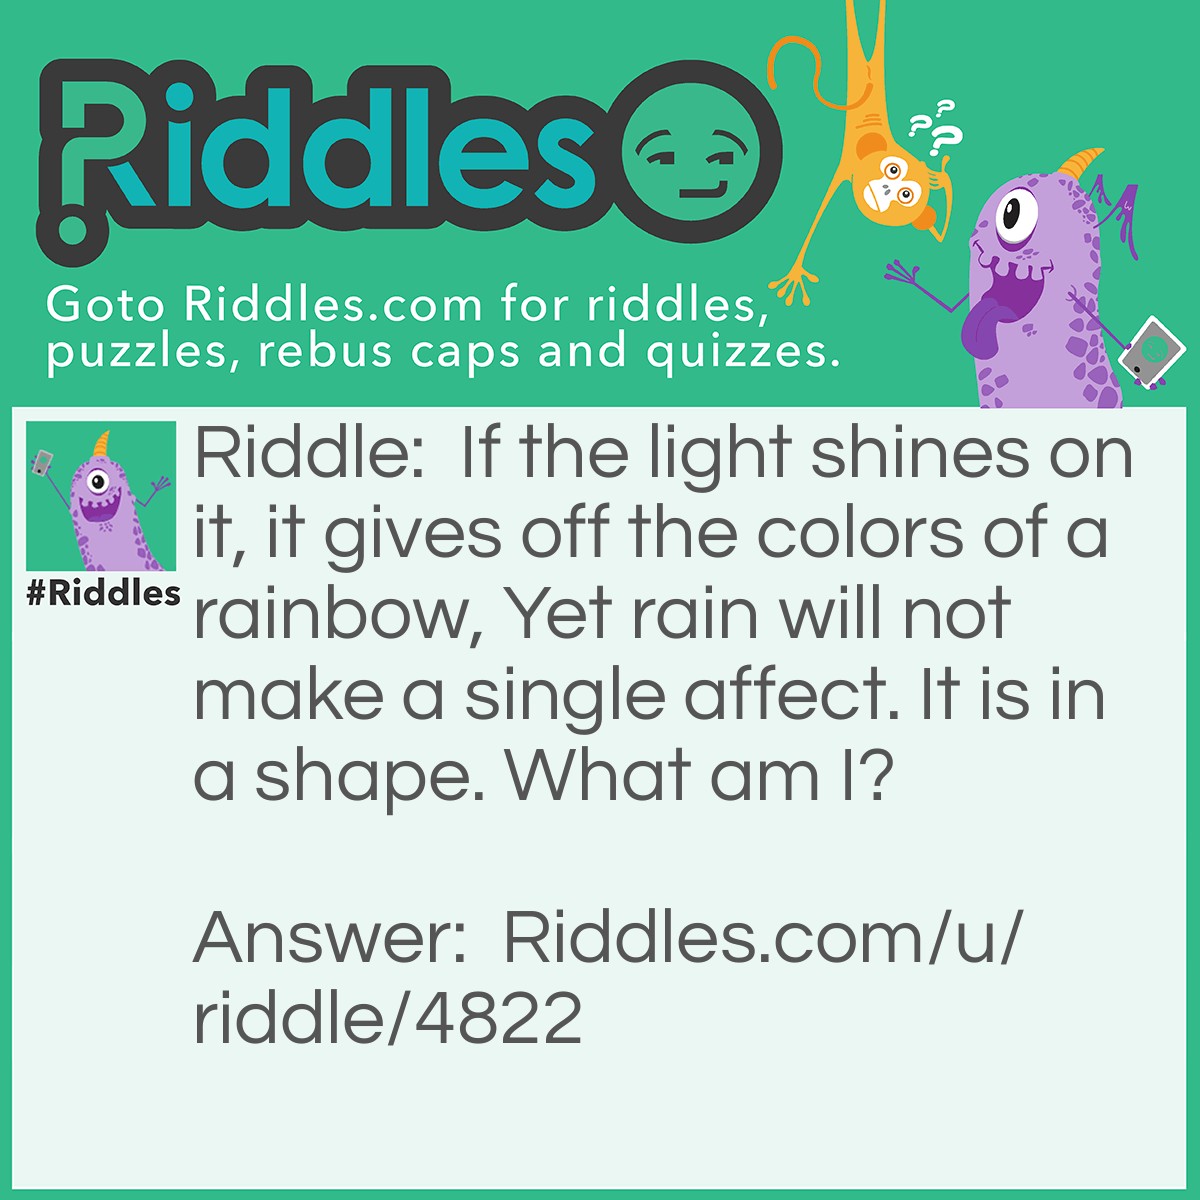 Riddle: If the light shines on it, it gives off the colors of a rainbow, Yet rain will not make a single affect. It is in a shape. What am I? Answer: A diamond prisim.